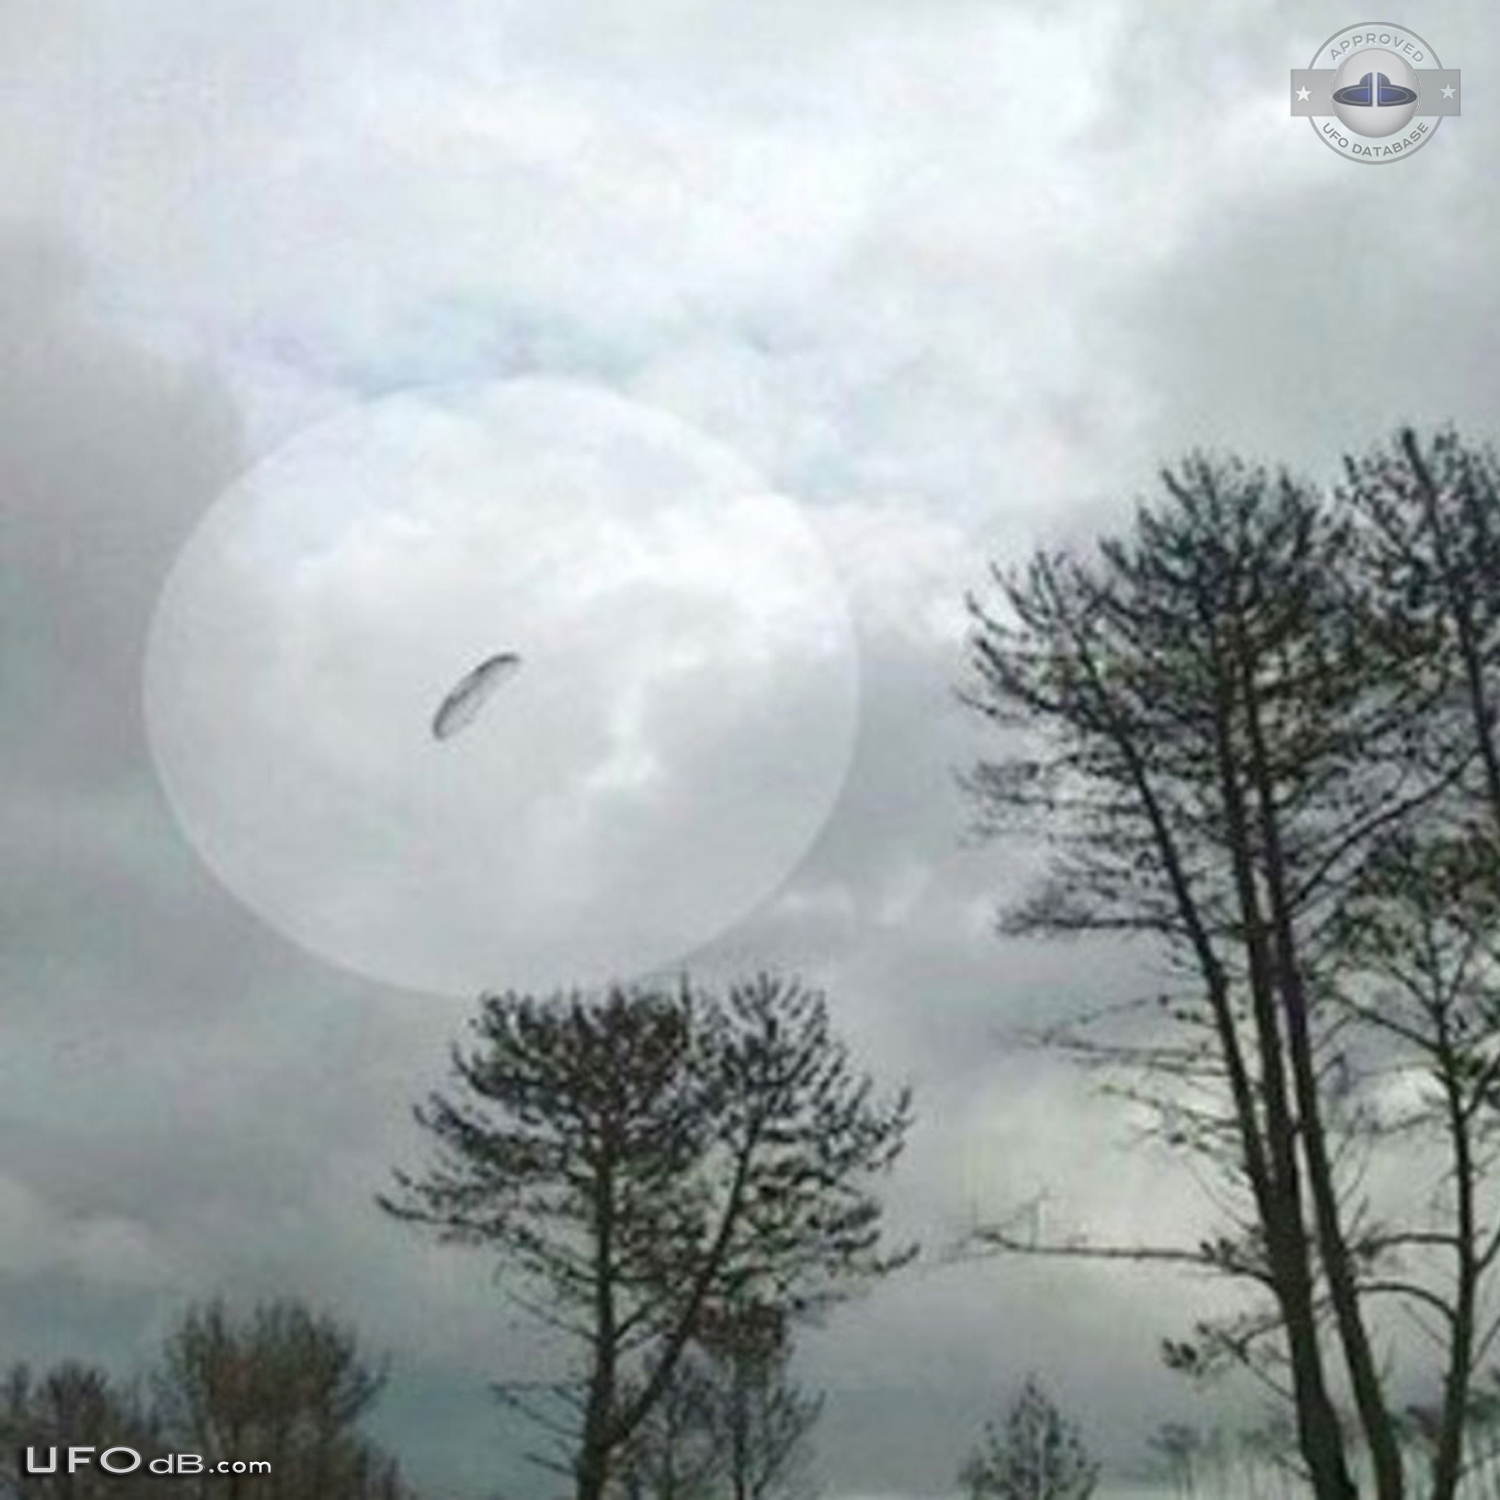 Parachute shaped UFO seen over Claromeco, Tres Arroyos Argentina UFO Picture #620-2